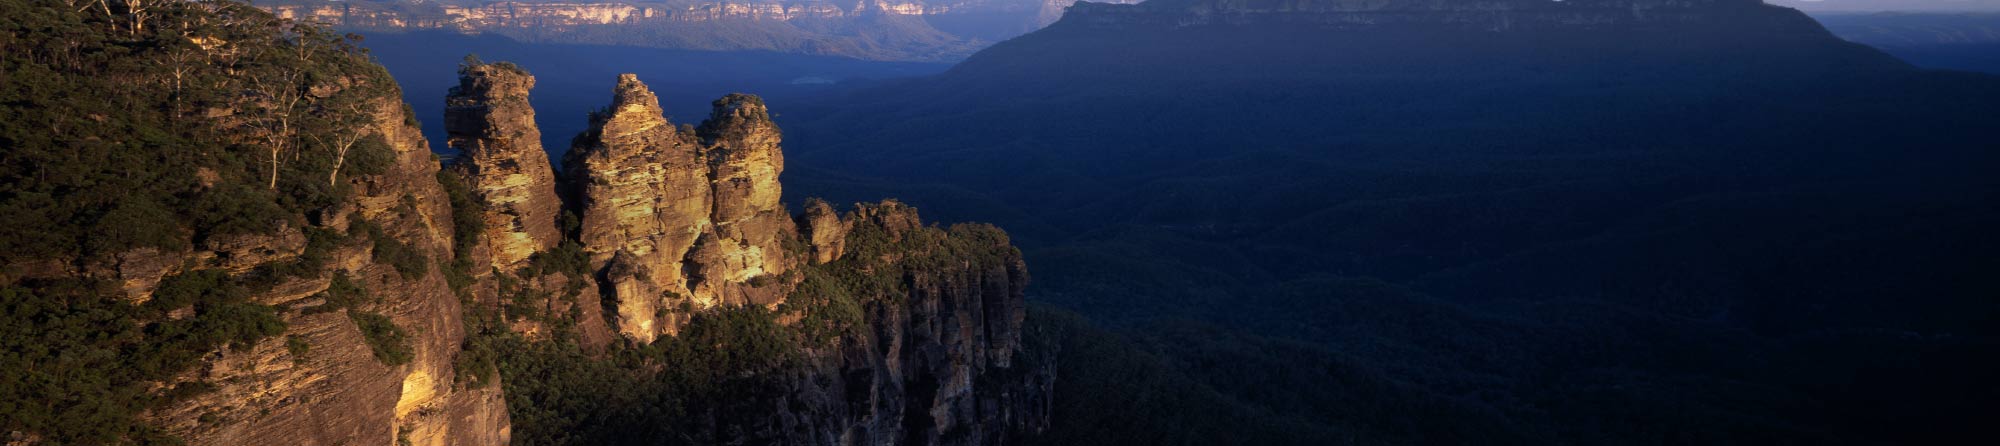 Suslight catching The Three Sisters rock outcrop in The Blue Mountains West of Sydney